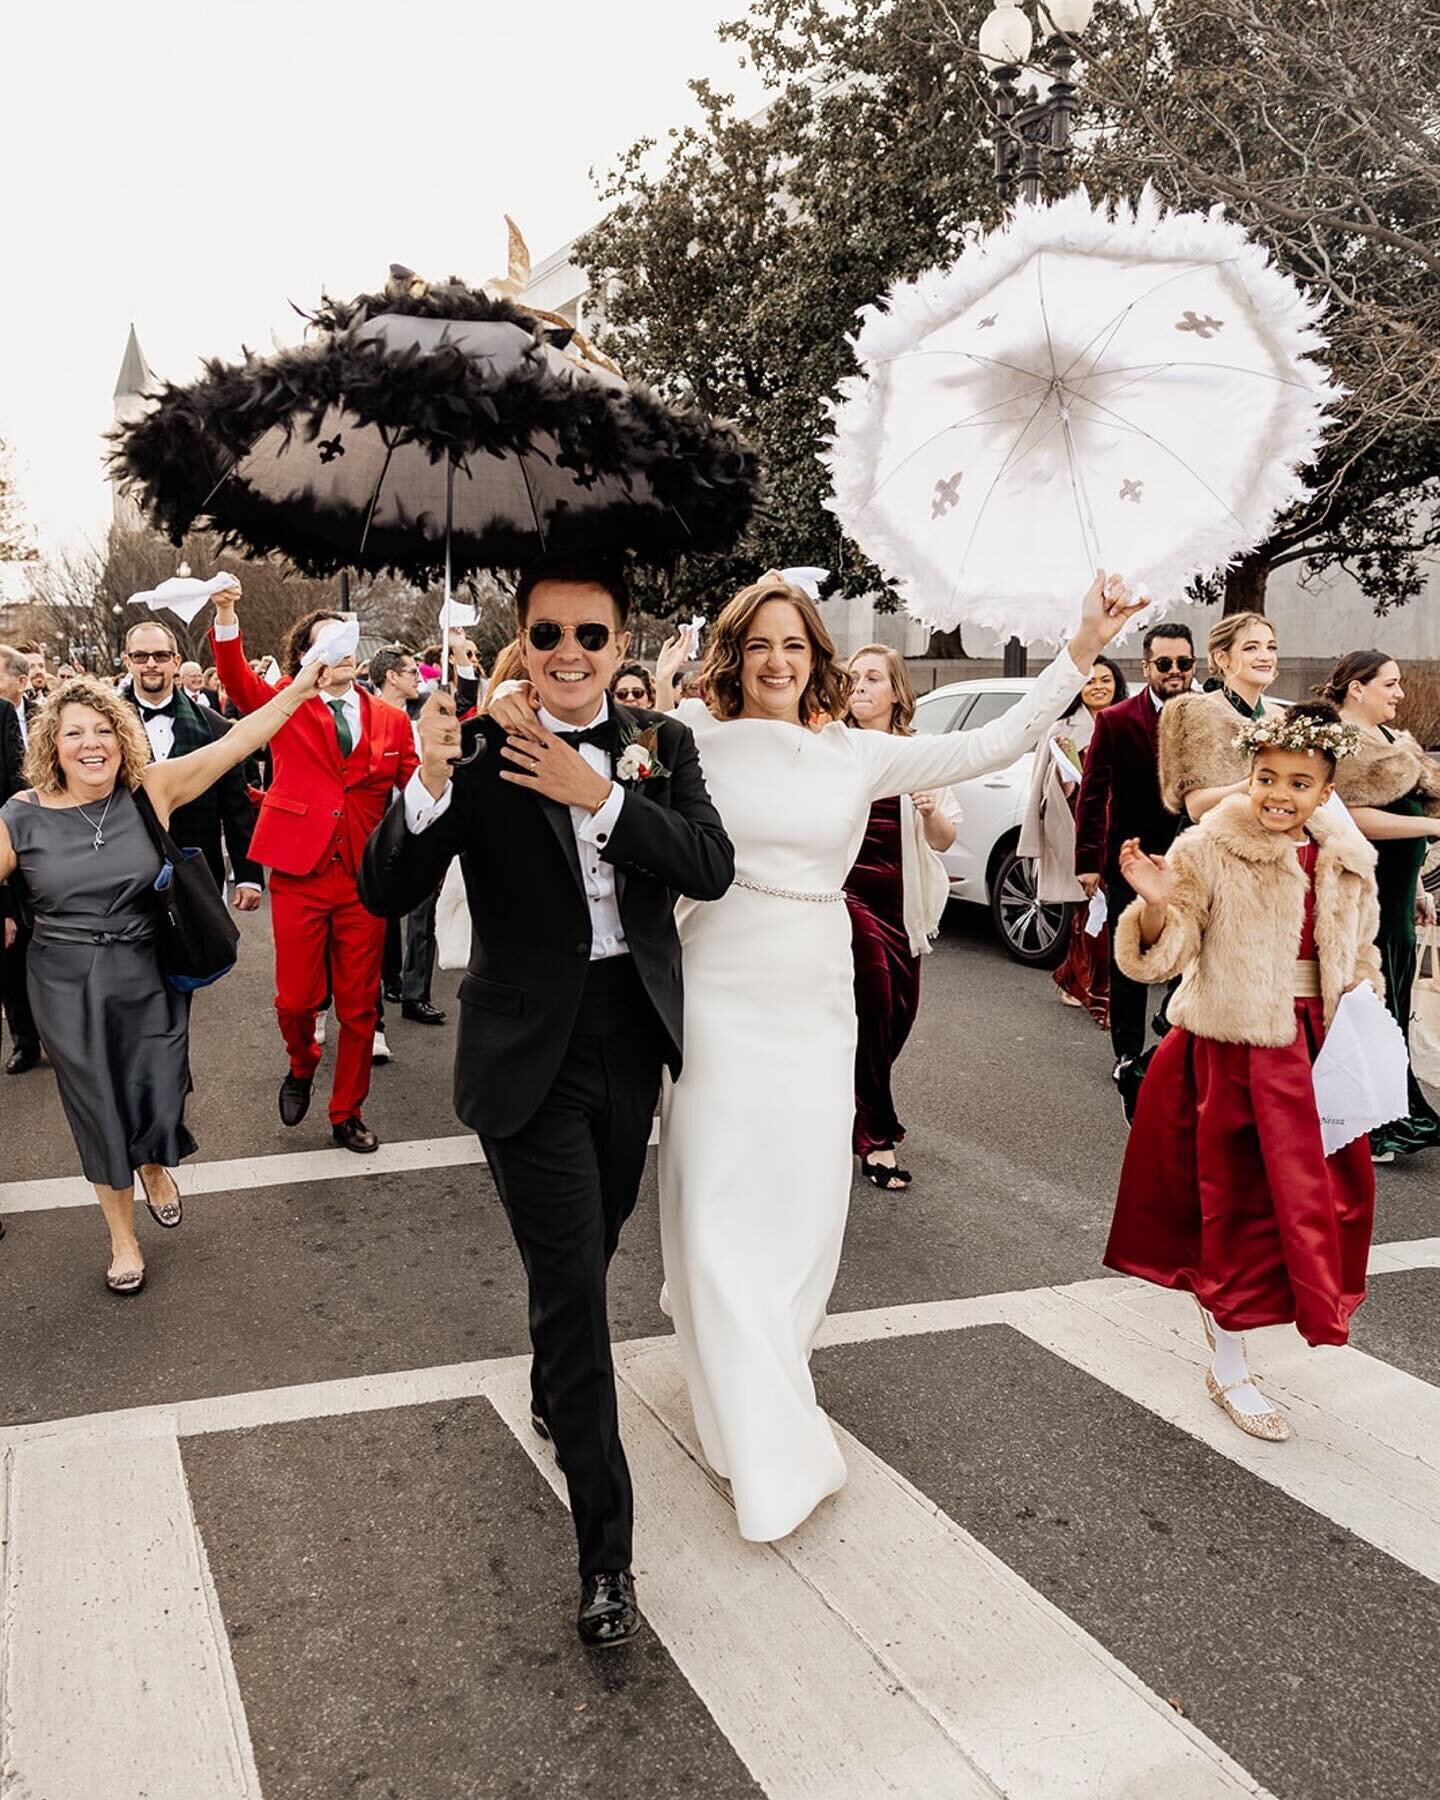 BIG fan of this Second Line for Molly and Alex&rsquo;s New Orleans-inspired December wedding. Alex grew up in NOLA and plays the tuba! 
⠀⠀⠀⠀⠀⠀⠀⠀⠀
The band, the parade, the dancing- it was all perfect 🥳. 
⠀⠀⠀⠀⠀⠀⠀⠀⠀
Highly recommend for anyone looking